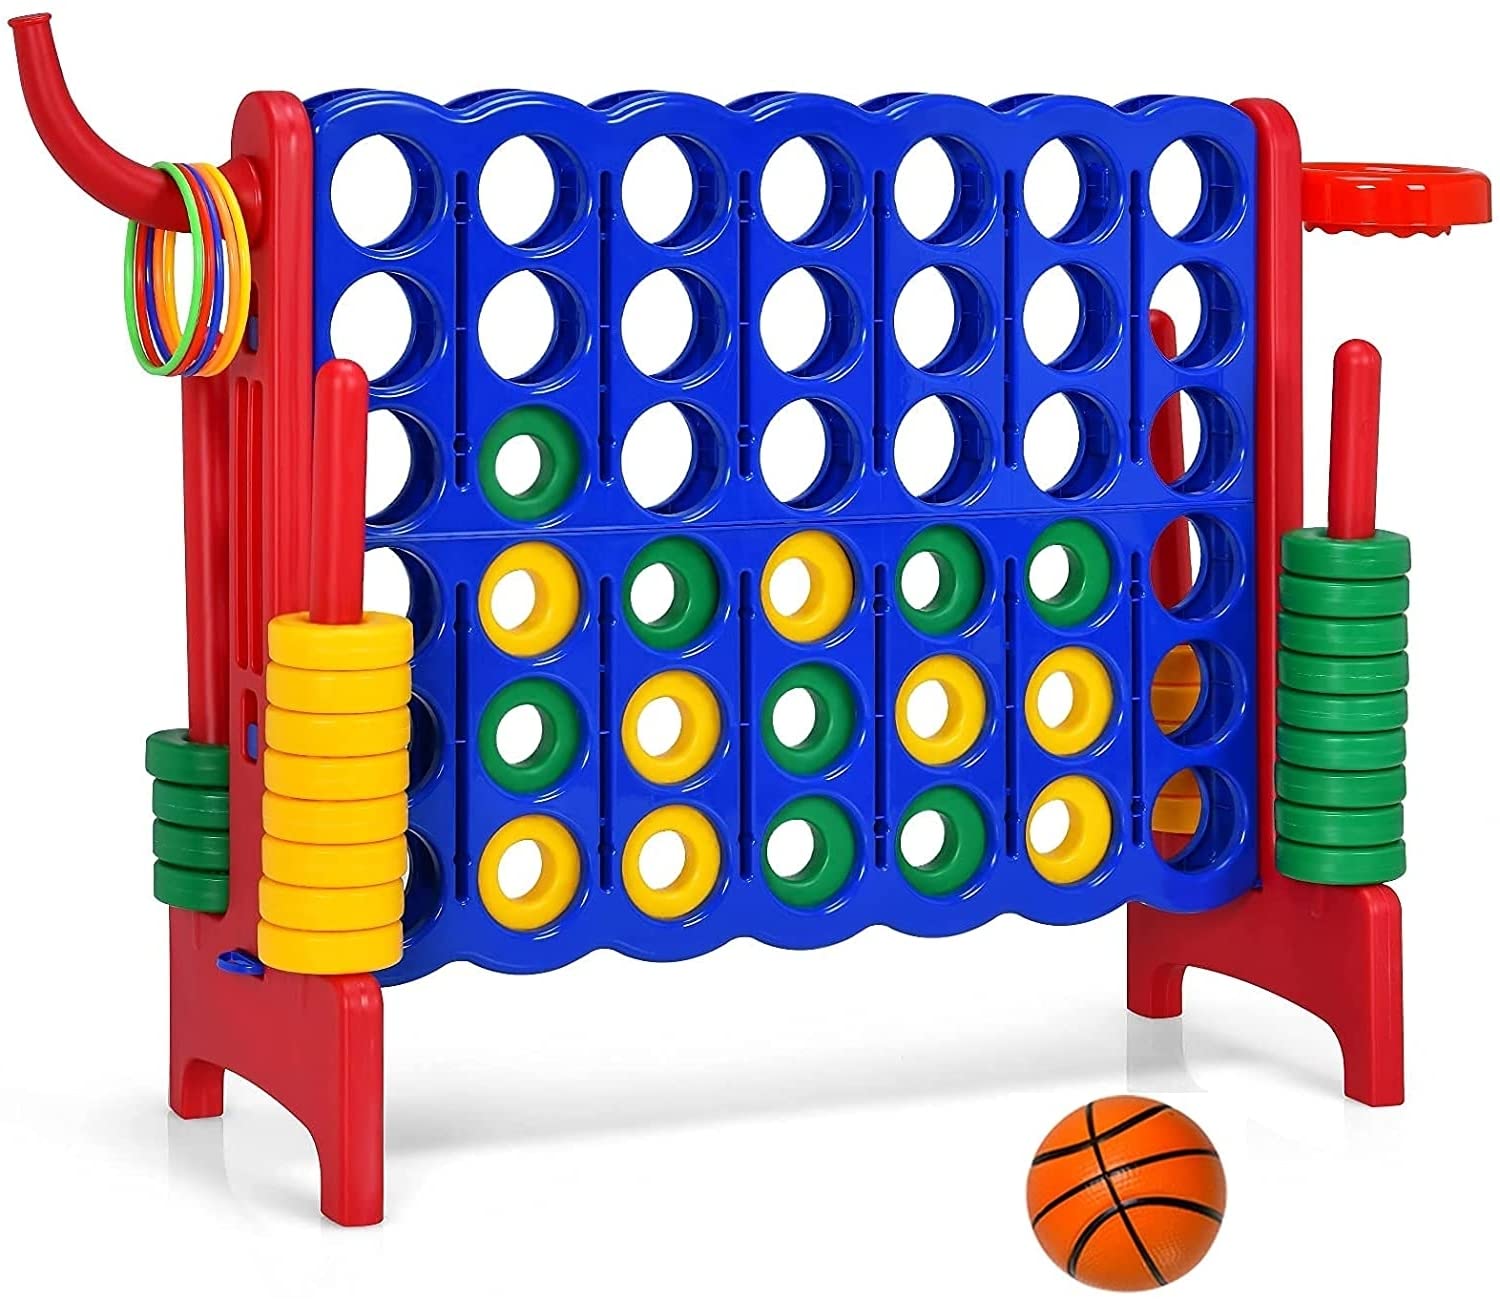 AUgESTER giant 4 in a Row connect game Jumbo 4 to Score game Set w 42 chess Rings Basketball & Hoop Toss Rings & Quick-Release L